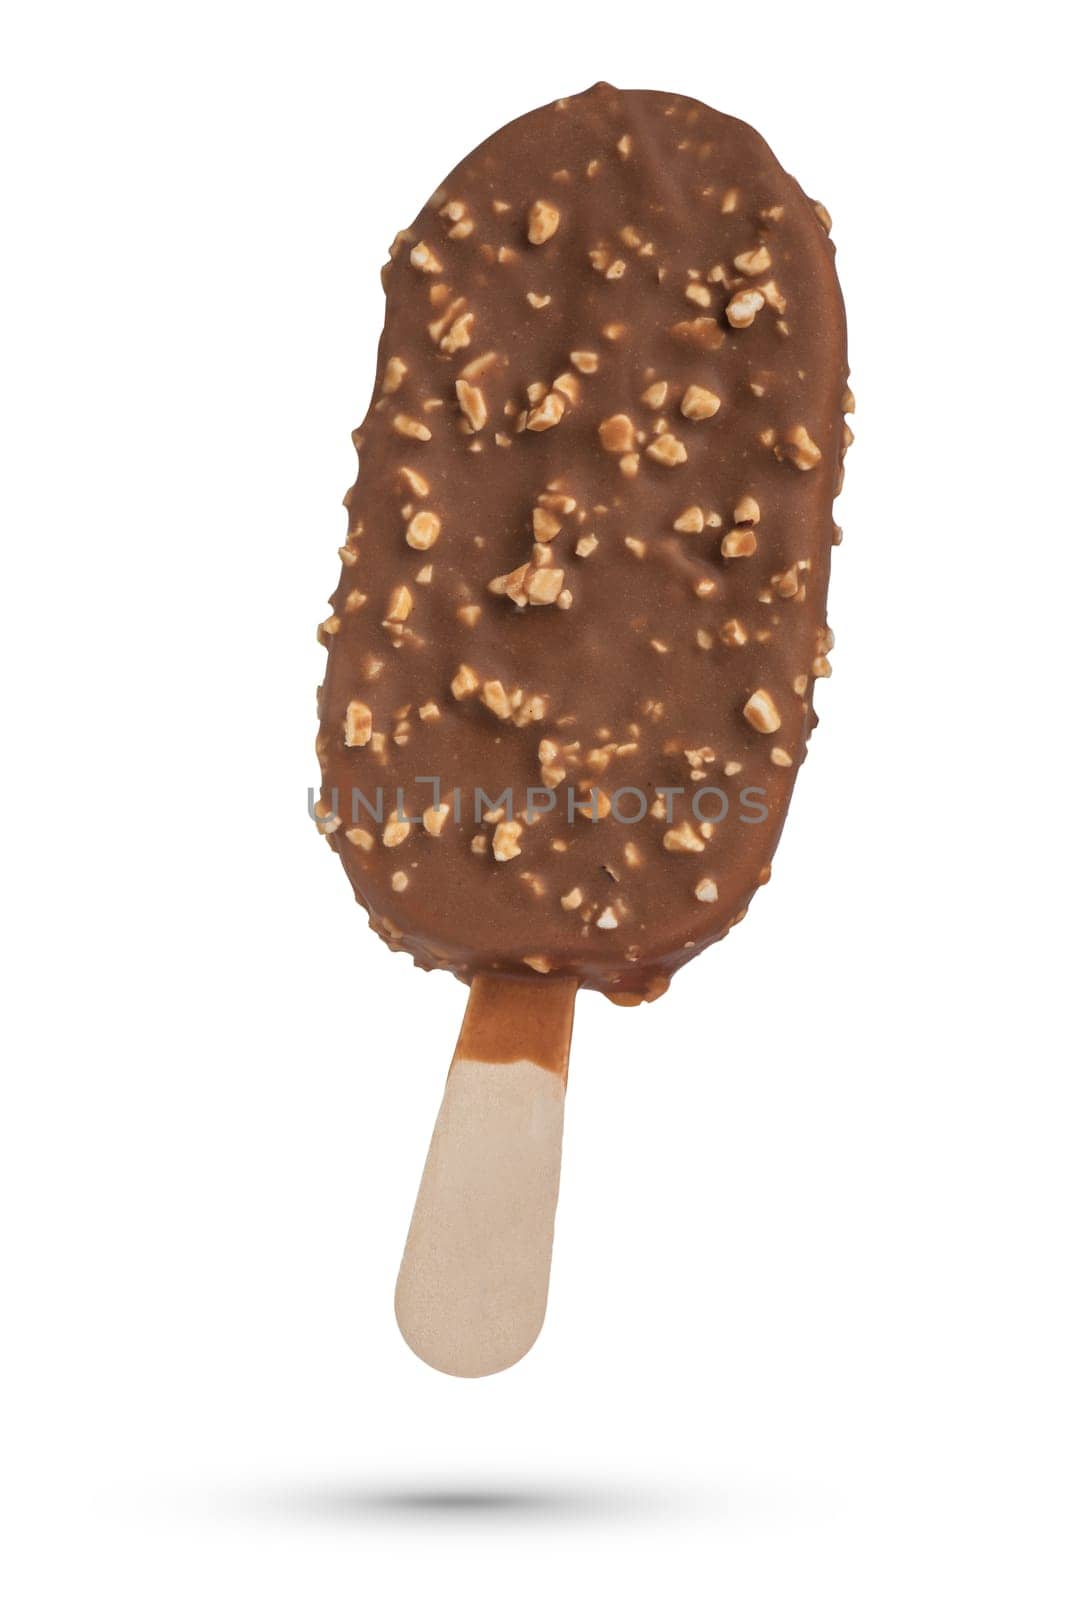 Ice cream on a stick, on a white isolated background. Ice cream covered with milk chocolate and nuts. Ice cream scoop isolate for inserting into a design or project. High quality photo